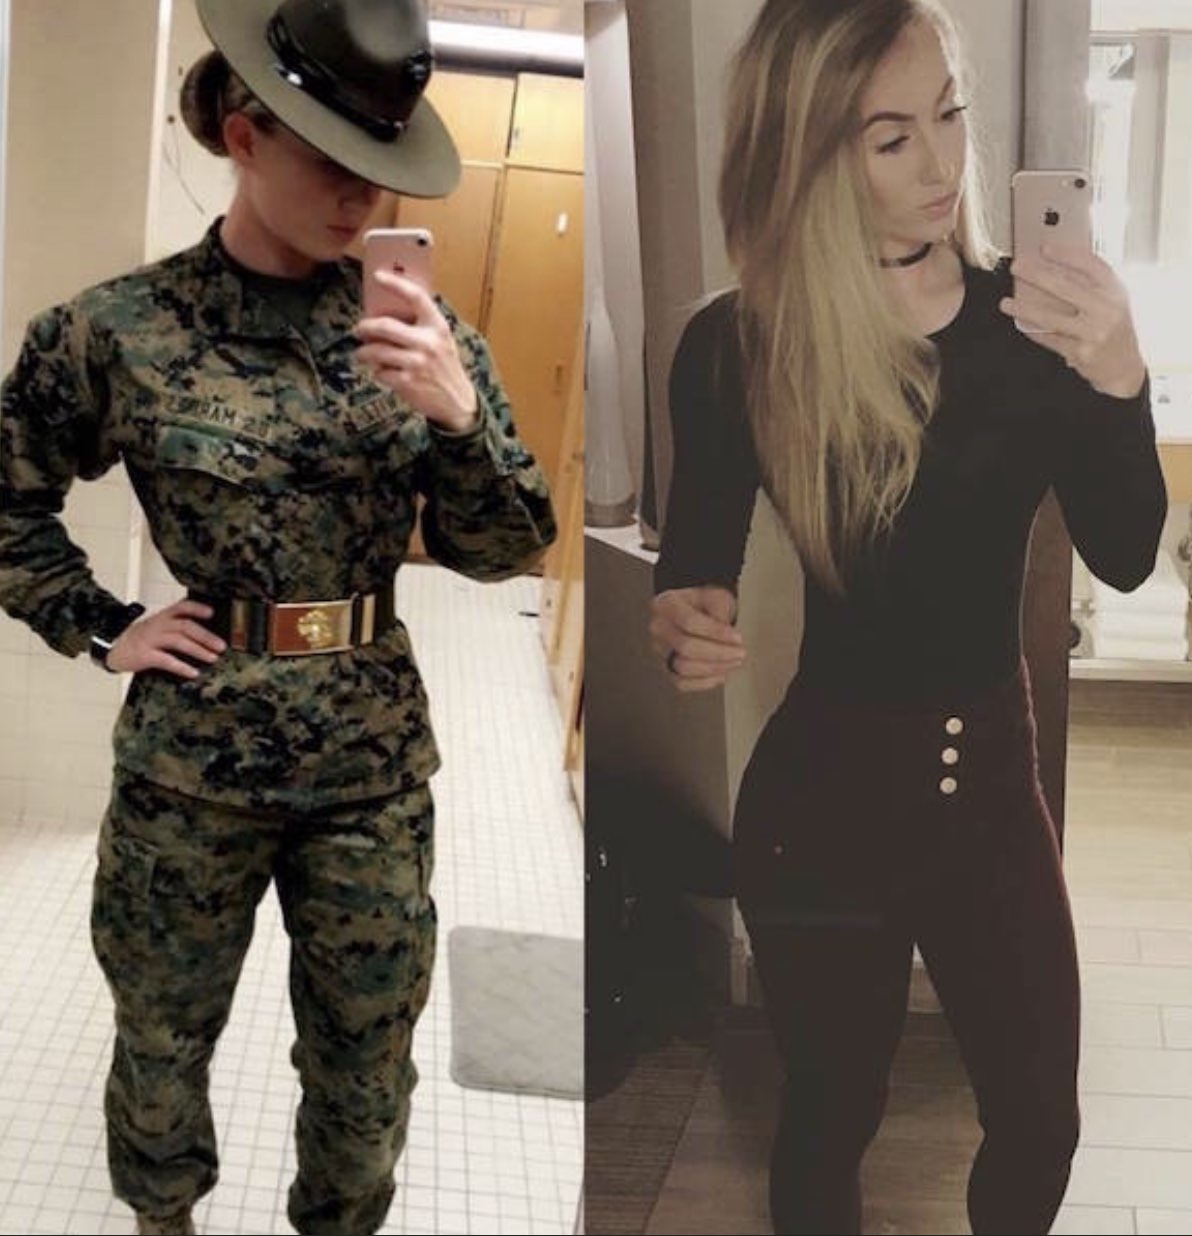 hot marine babe in uniform taking selfie, and a selfie of her in tight fitting clothes